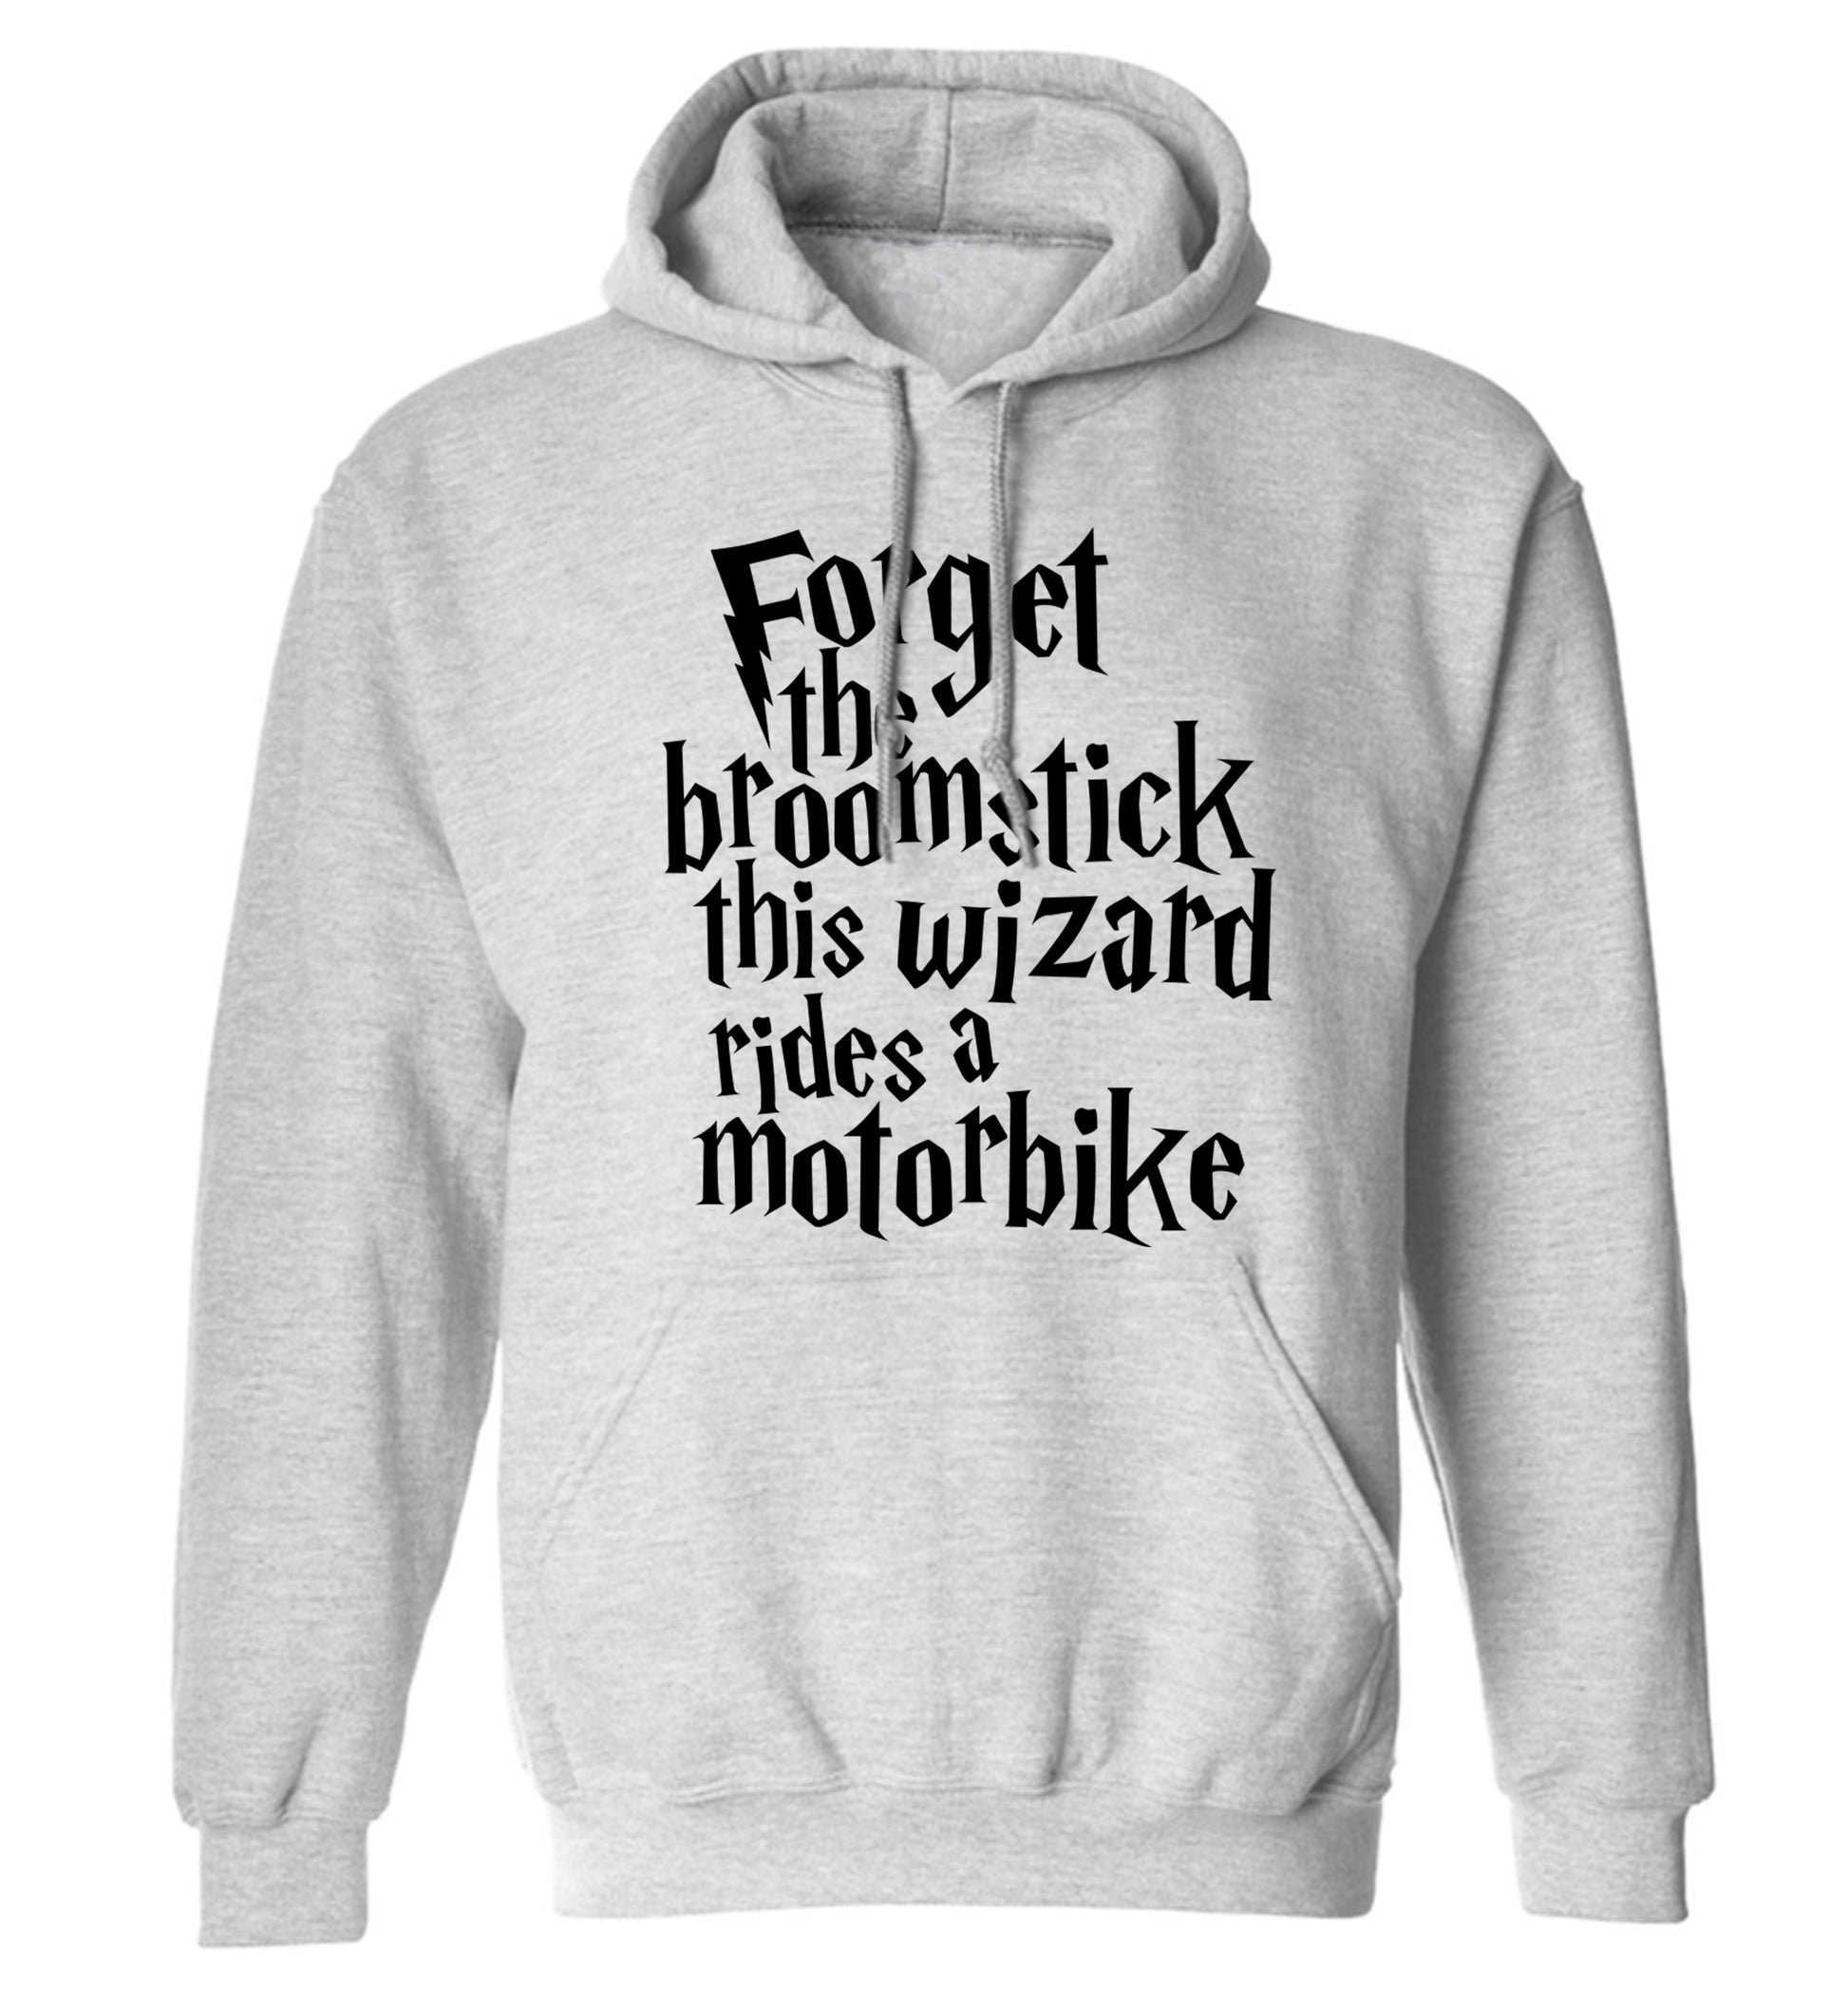 Forget the broomstick this wizard rides a motorbike adults unisexgrey hoodie 2XL